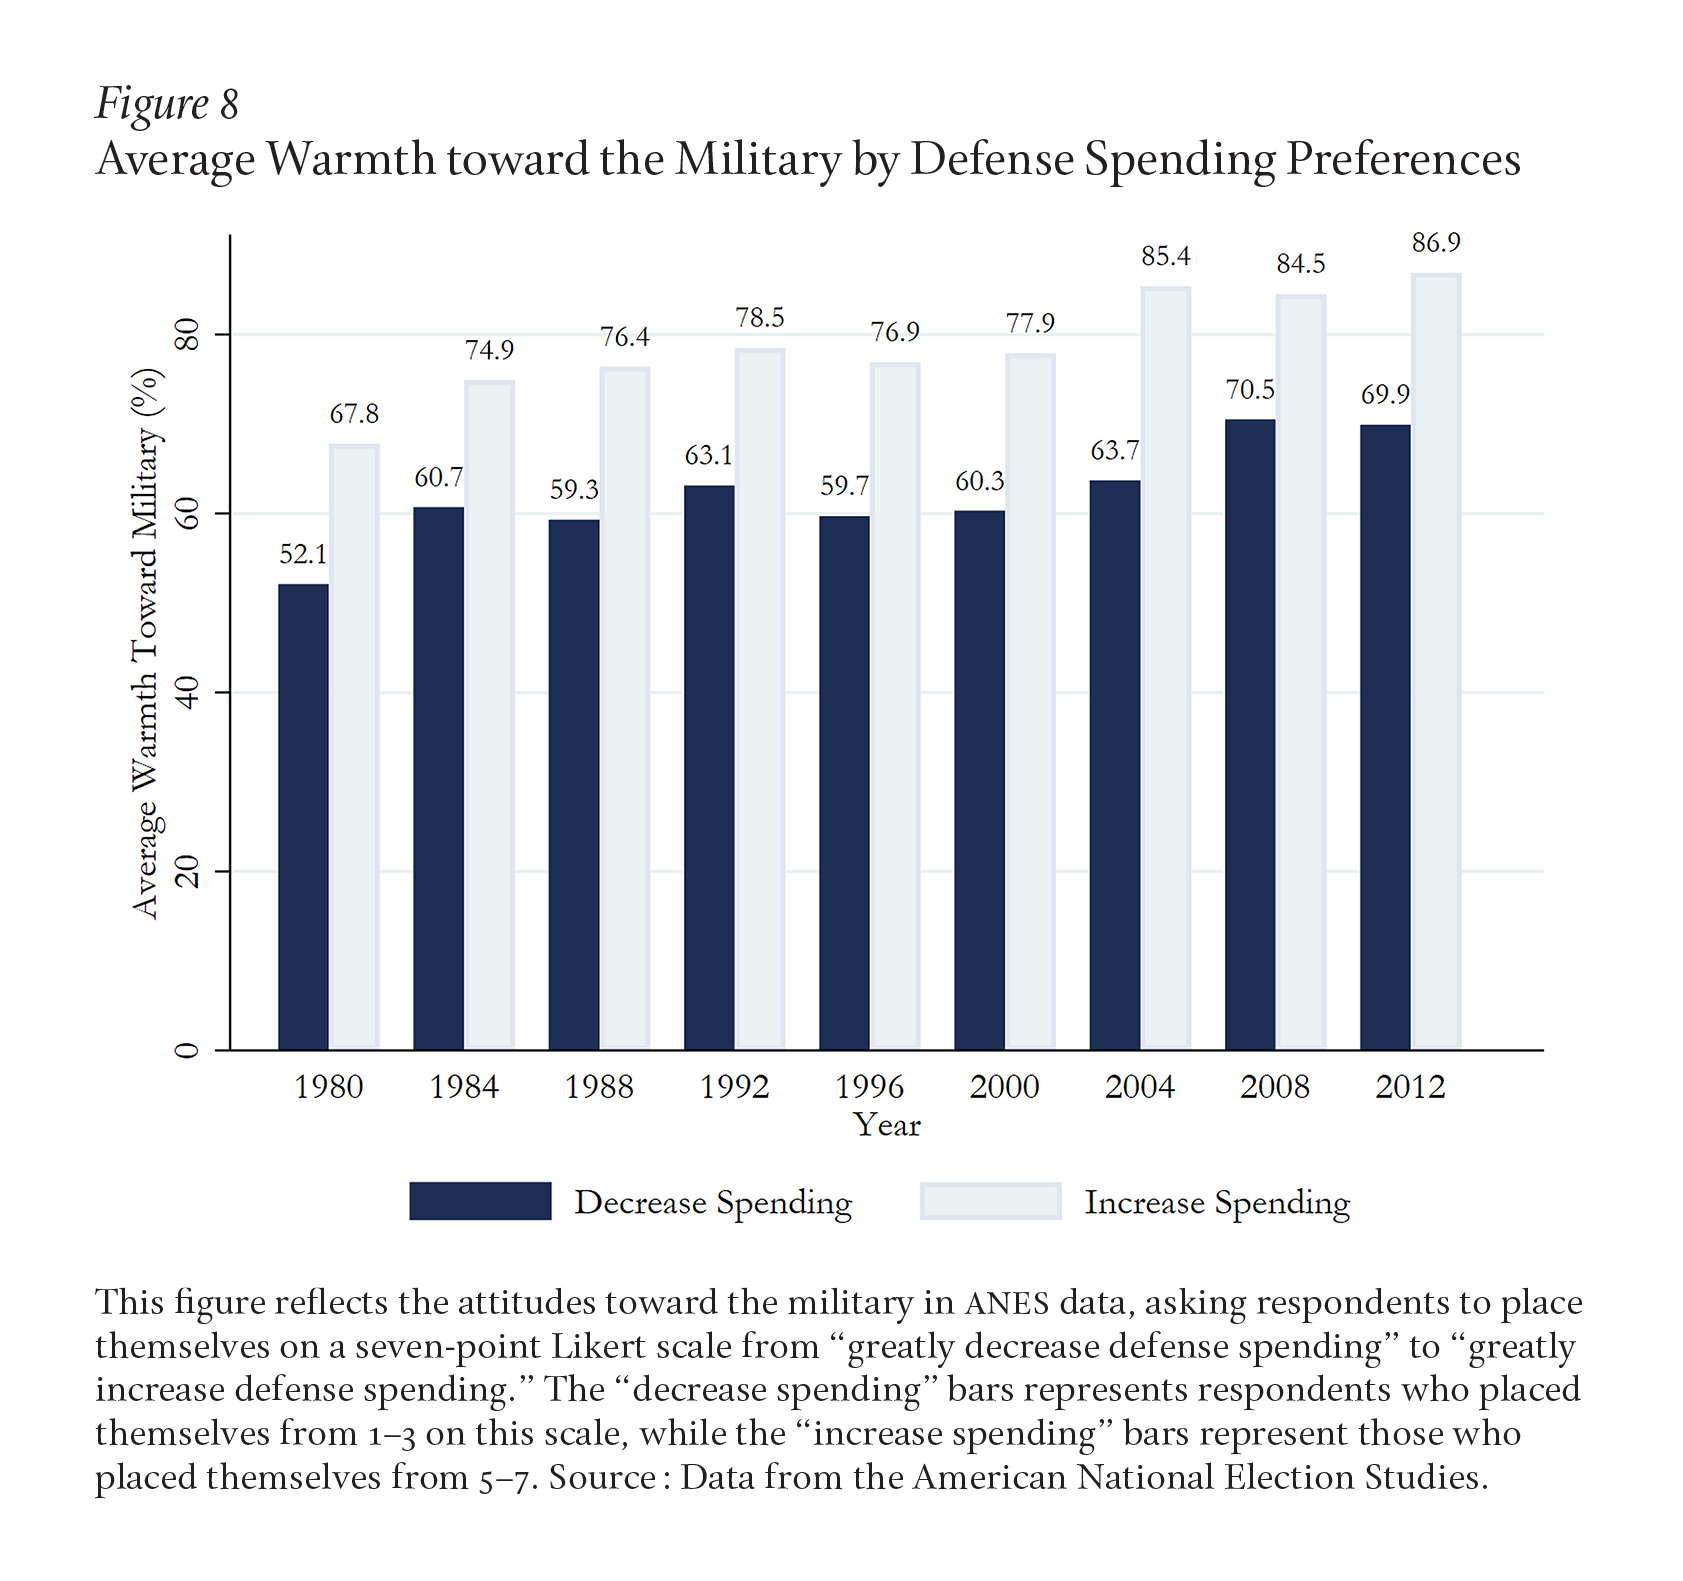 Figure 8 shows a consistent fourteen-point or greater difference in warmth toward the military between those who prefer to increase defense spending and those who prefer to decrease it.